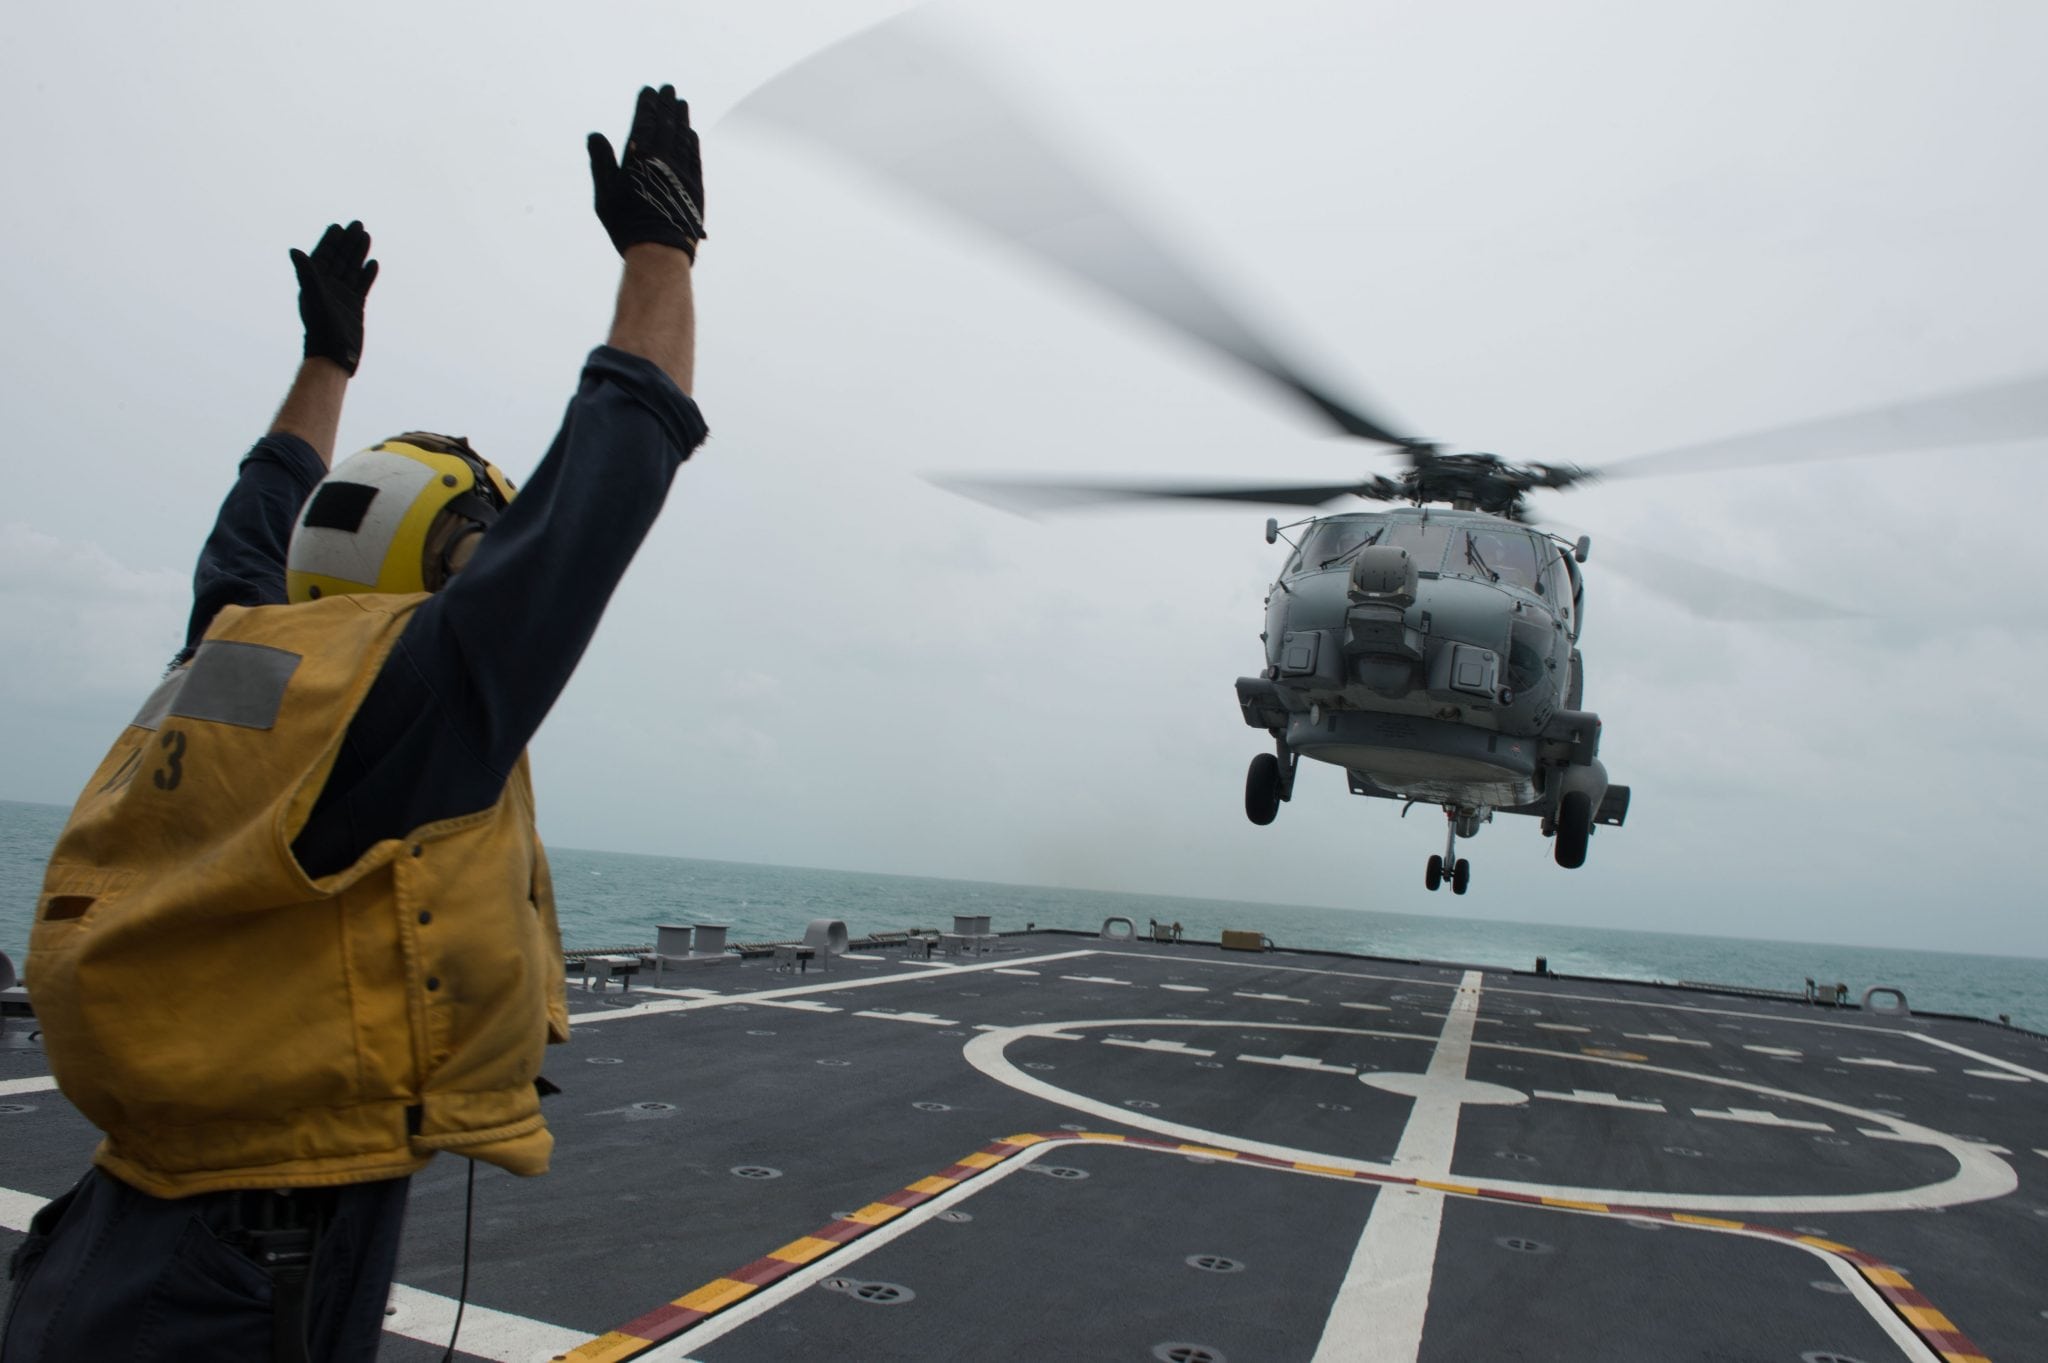 MH-60R Sea Hawk helicopter onducting helicopter search and recovery operations as part of the Indonesian-led efforts to locate missing AirAsia Flight QZ8501